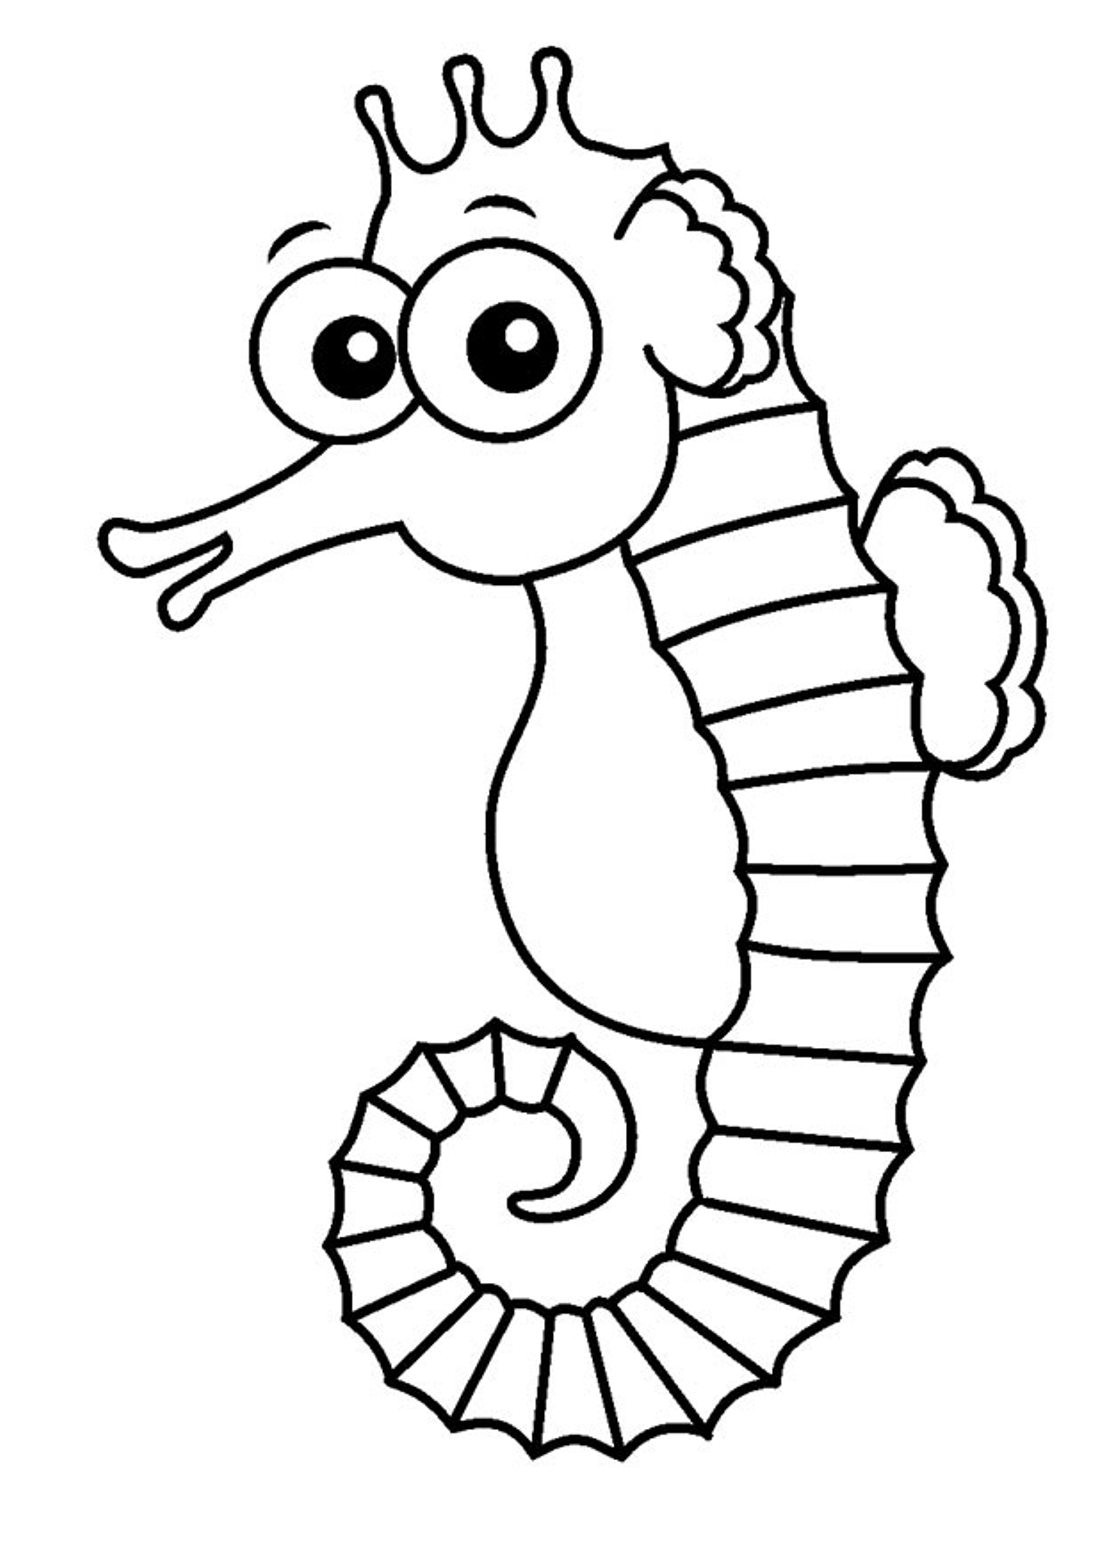 Seahorse Coloring Pages To Print at GetDrawings Free download